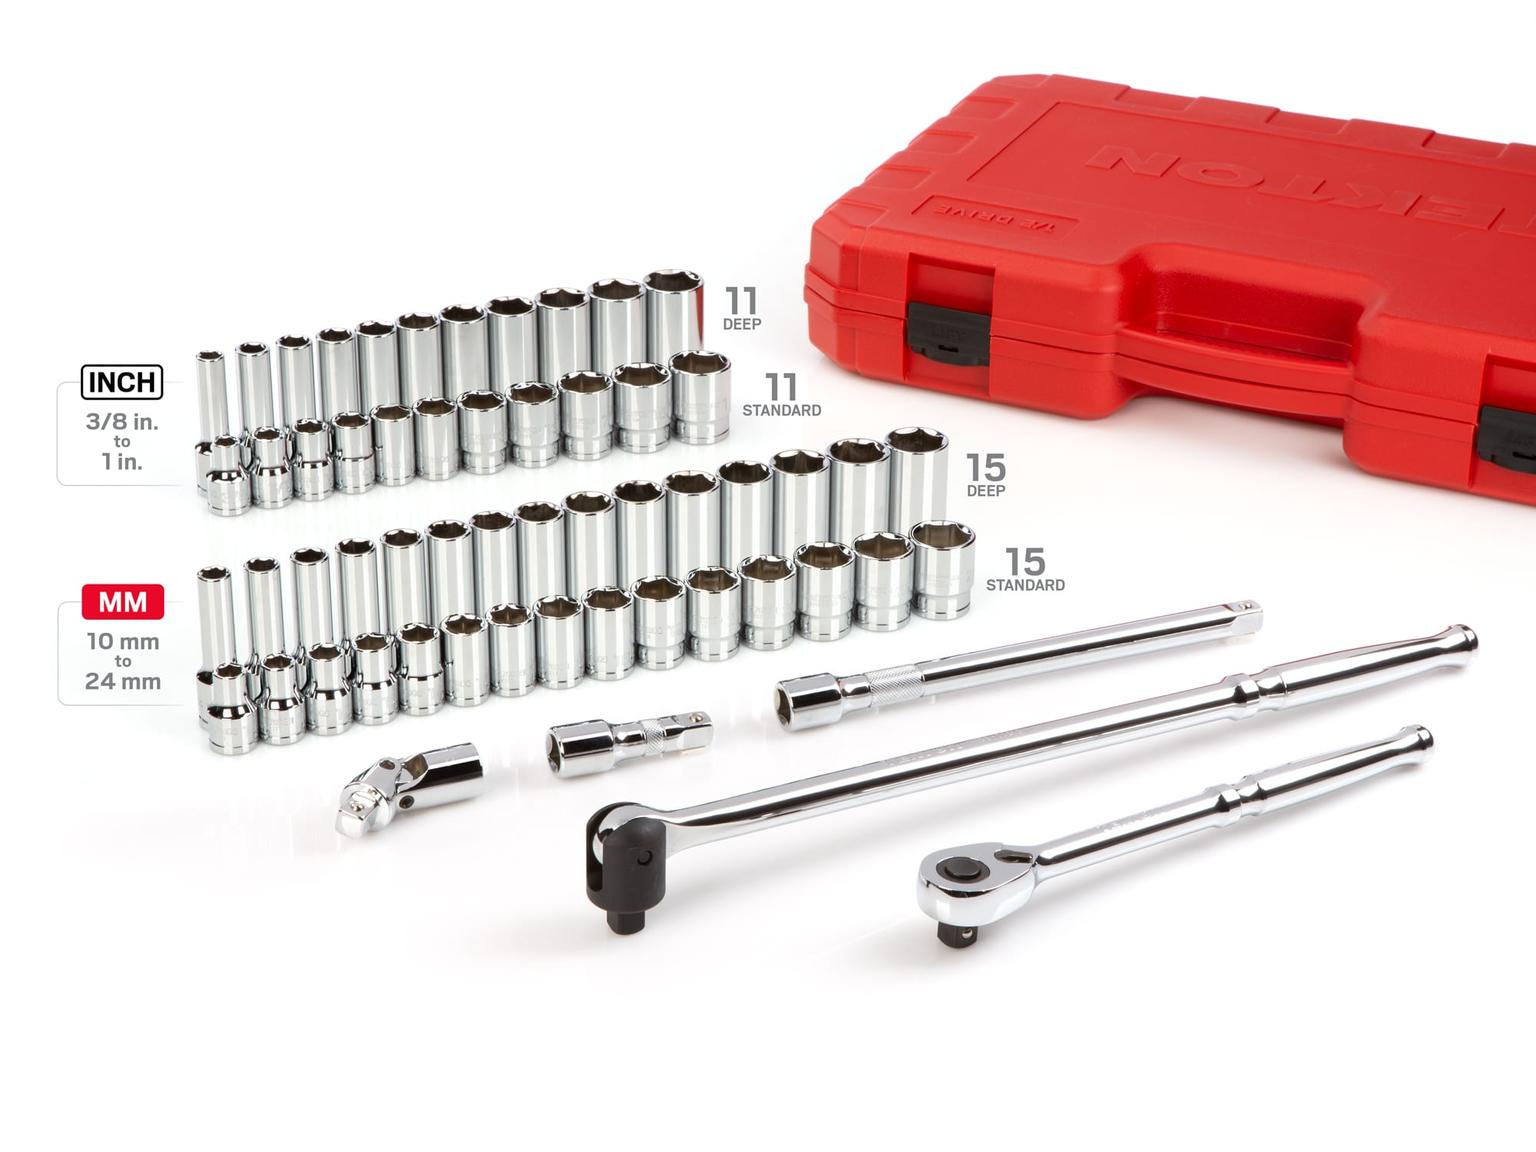 TEKTON SKT25301-D 1/2 Inch Drive 6-Point Socket and Ratchet Set, 57-Piece (3/8-1 in., 10-24 mm)